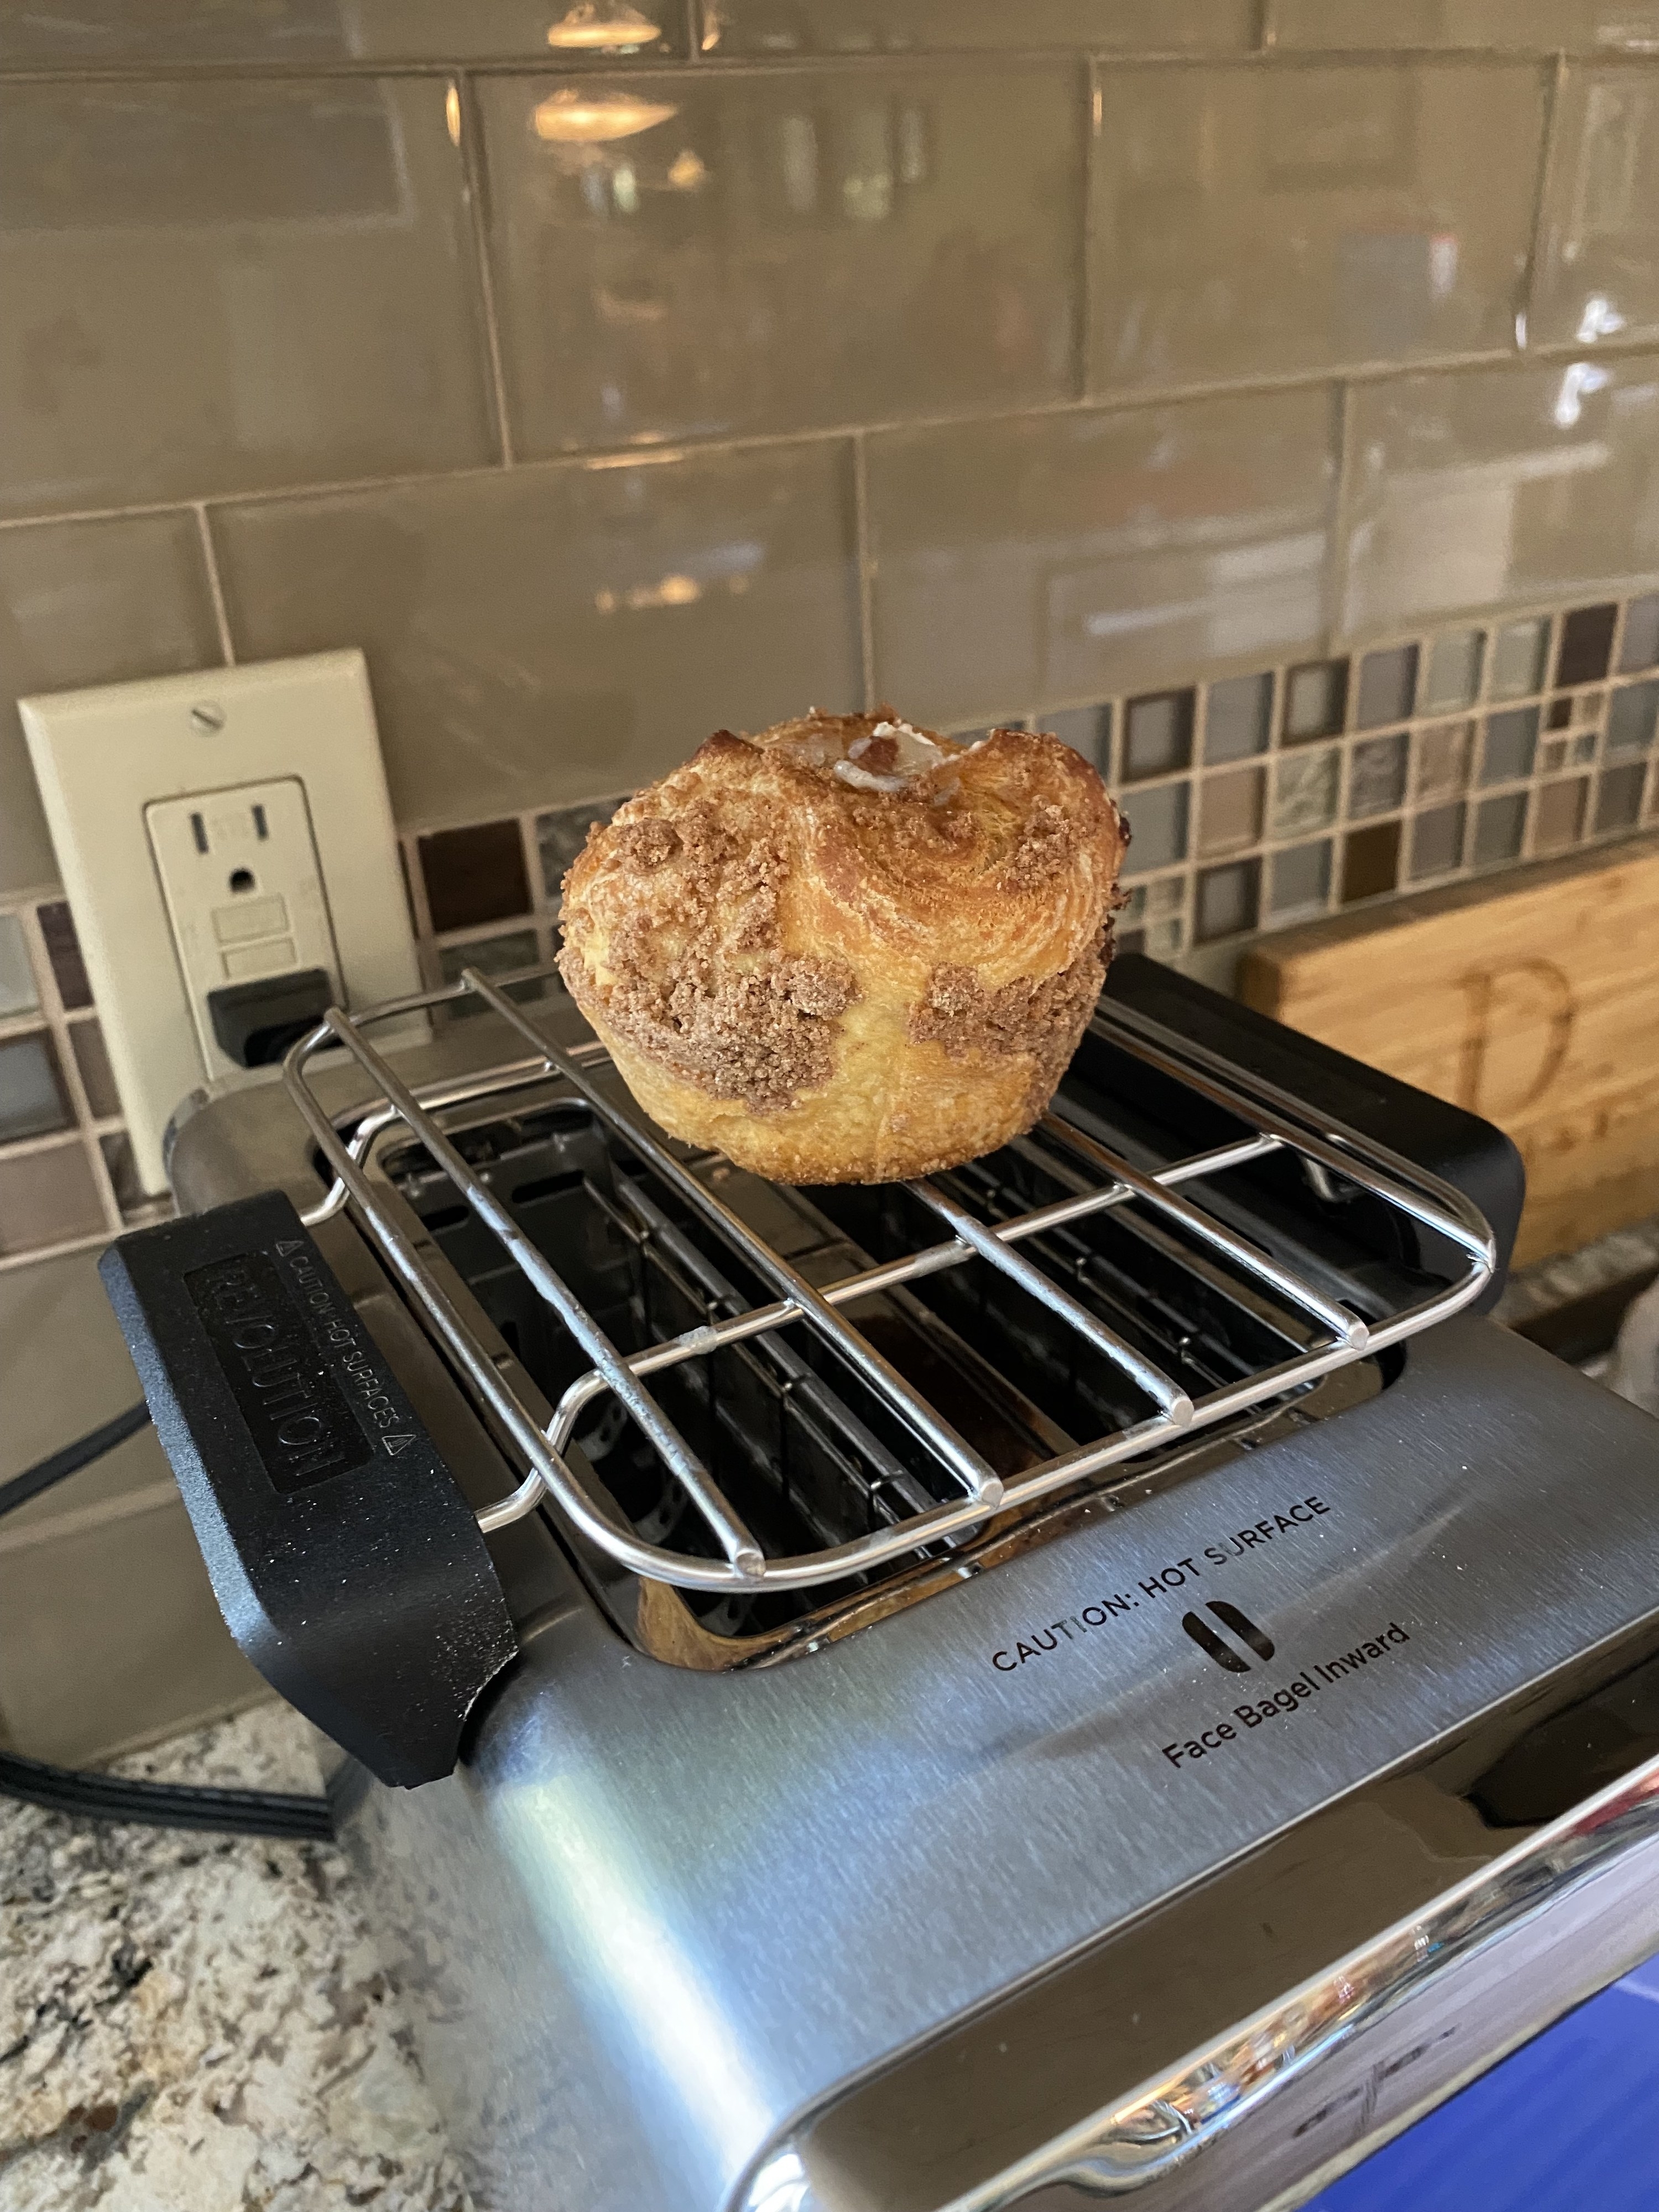 Revolution Cooking Toaster Review